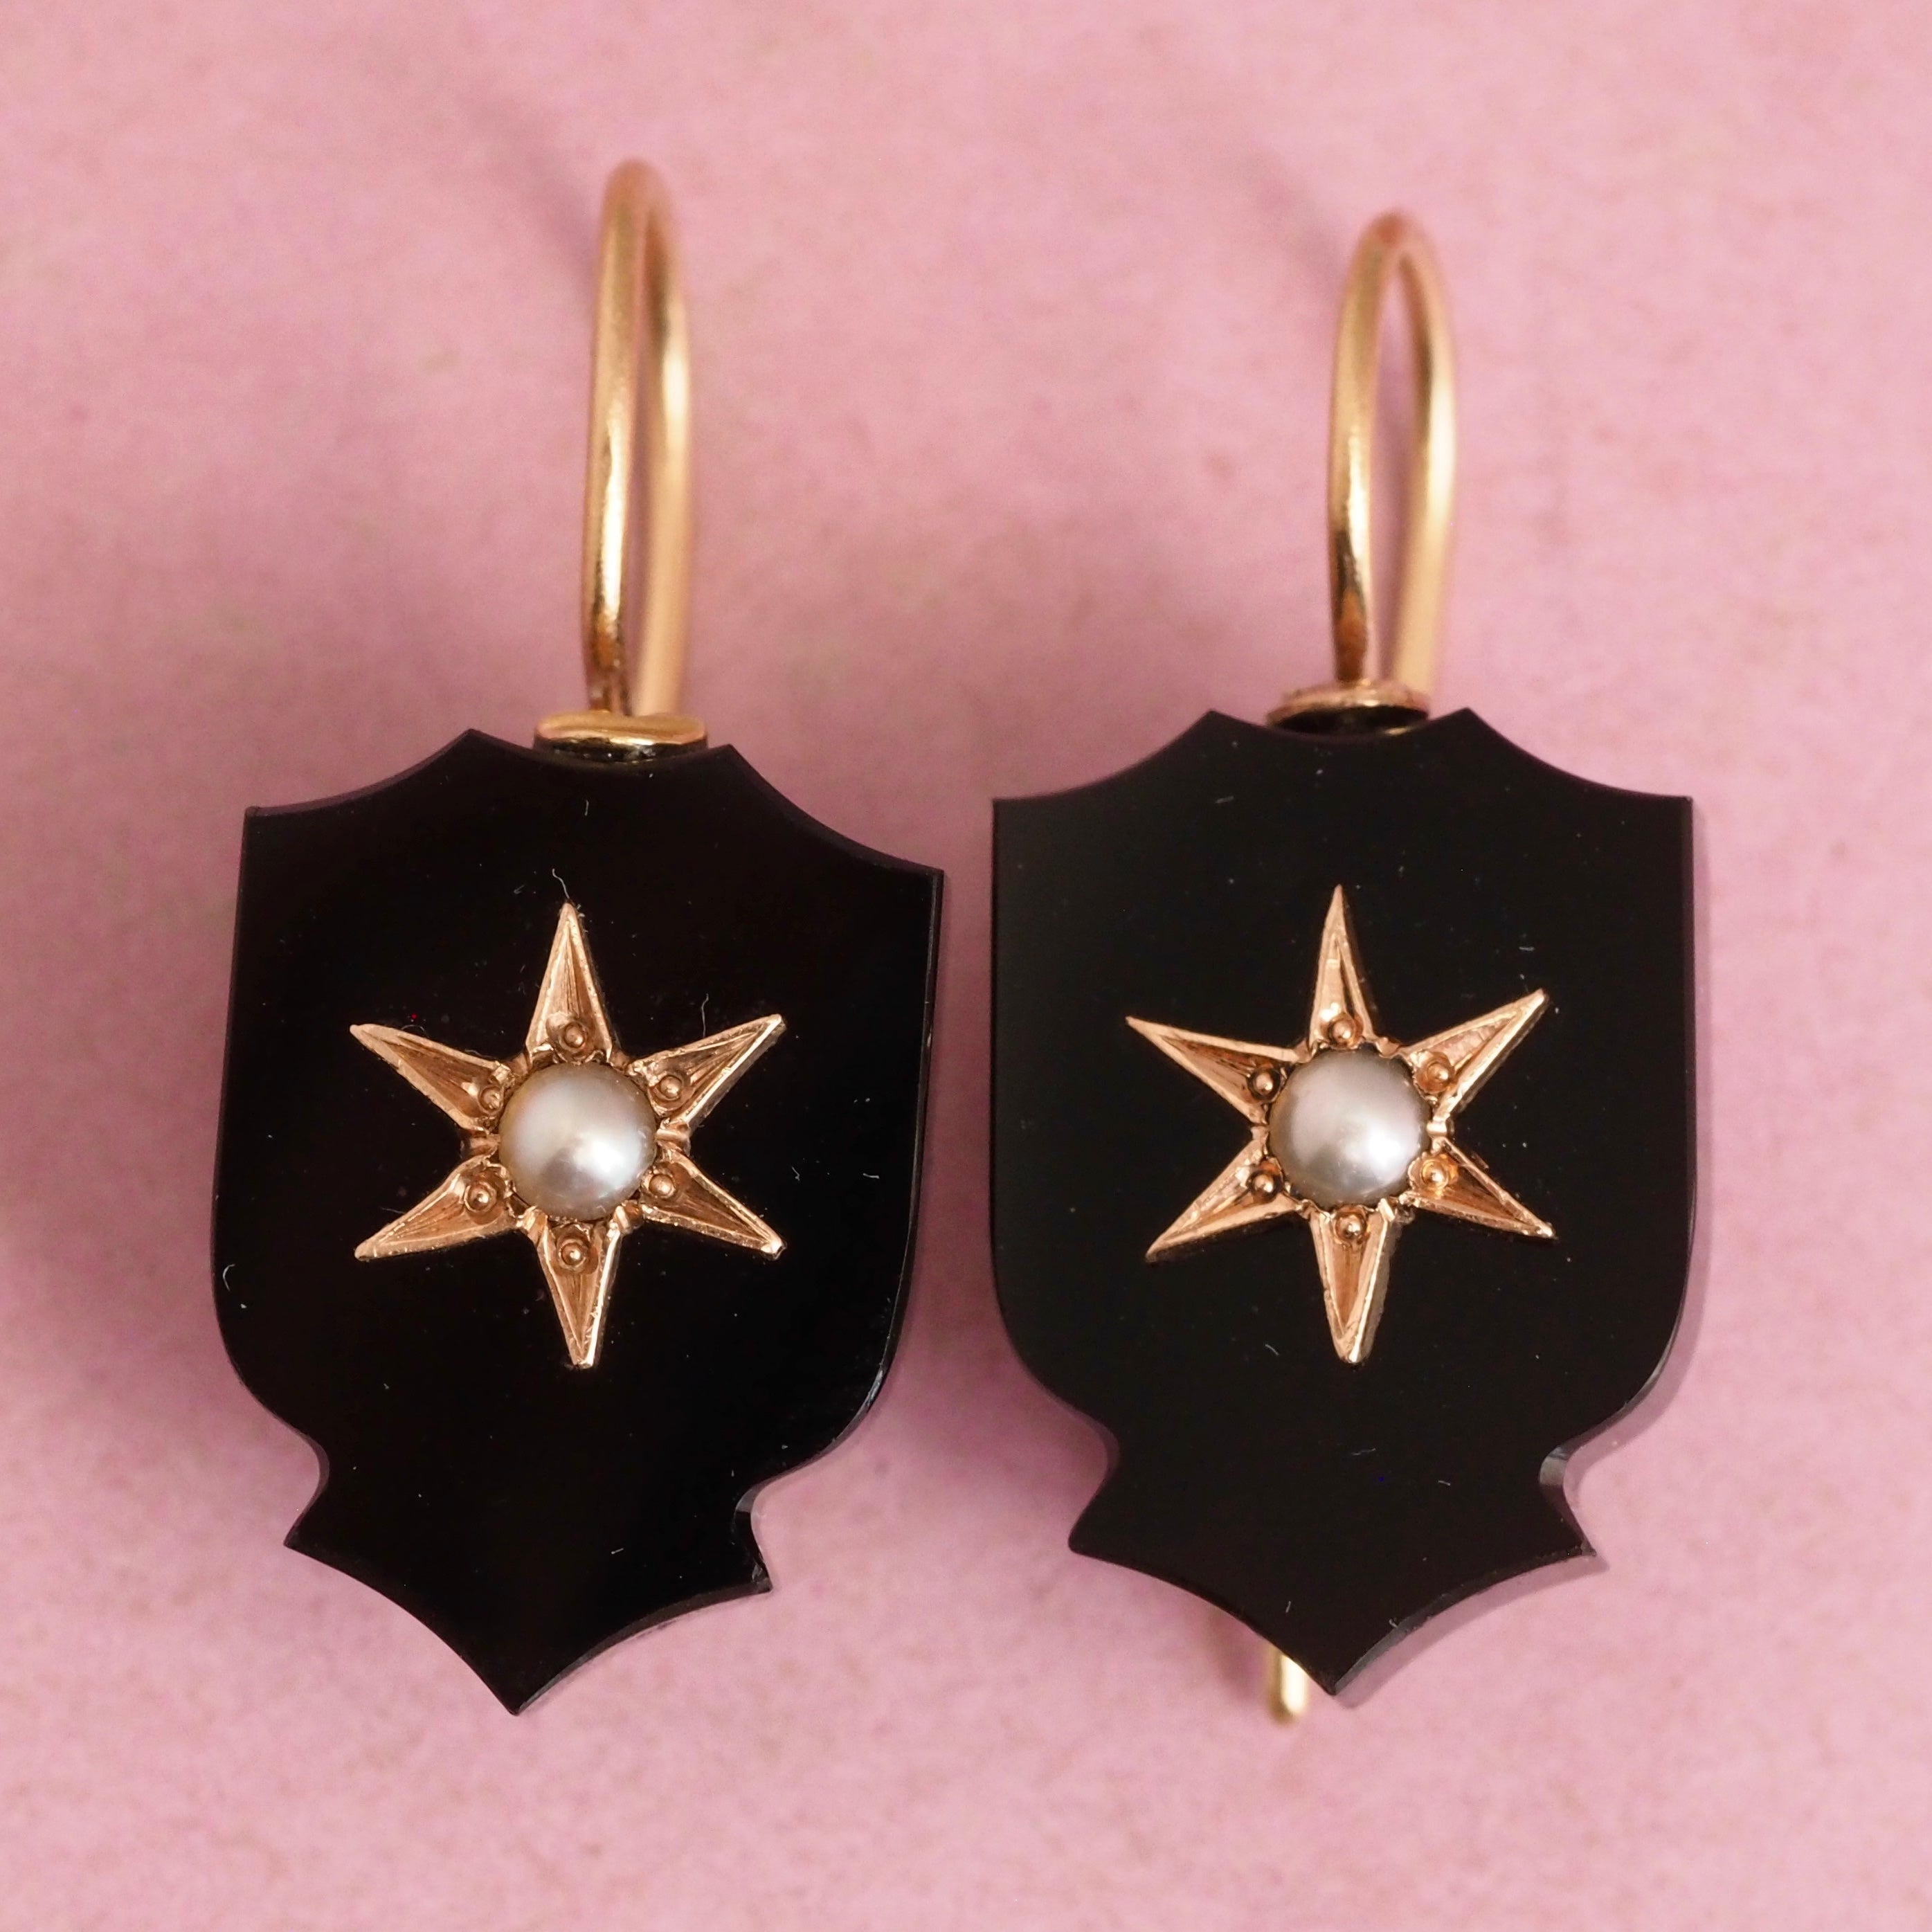 Antique Victorian 14k Gold Onyx and Seed Pearl Starburst Shield Earrings